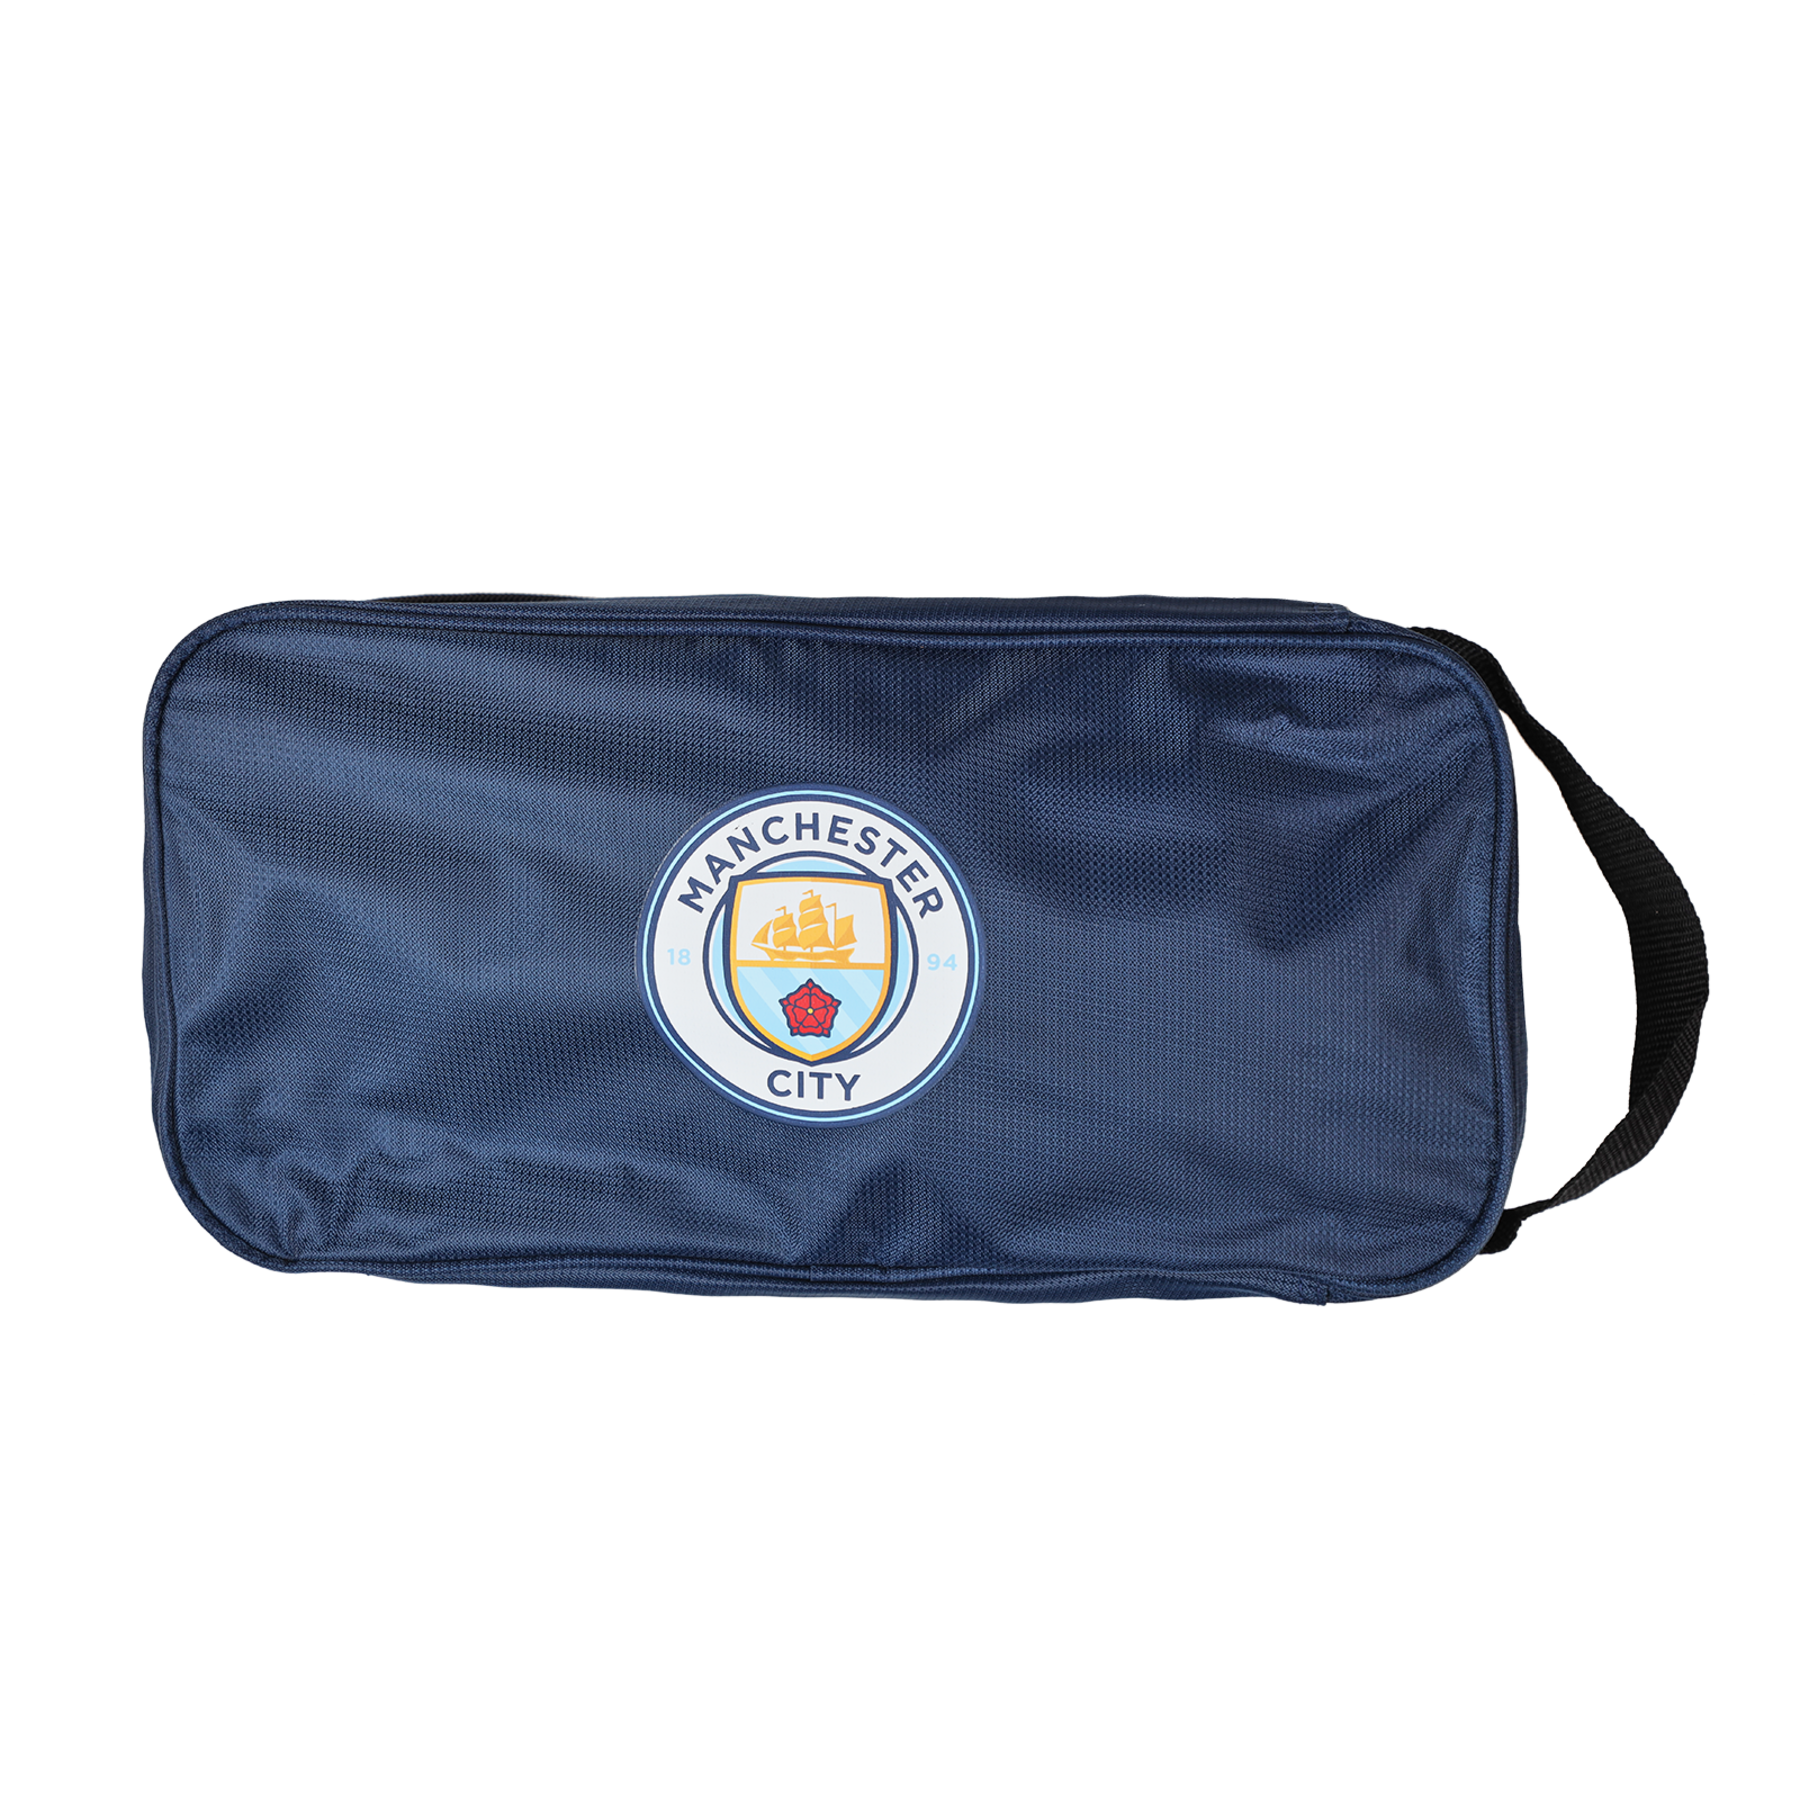 Boot Bag Official Merchandise by Manchester City F.C. Manchester City F.C 